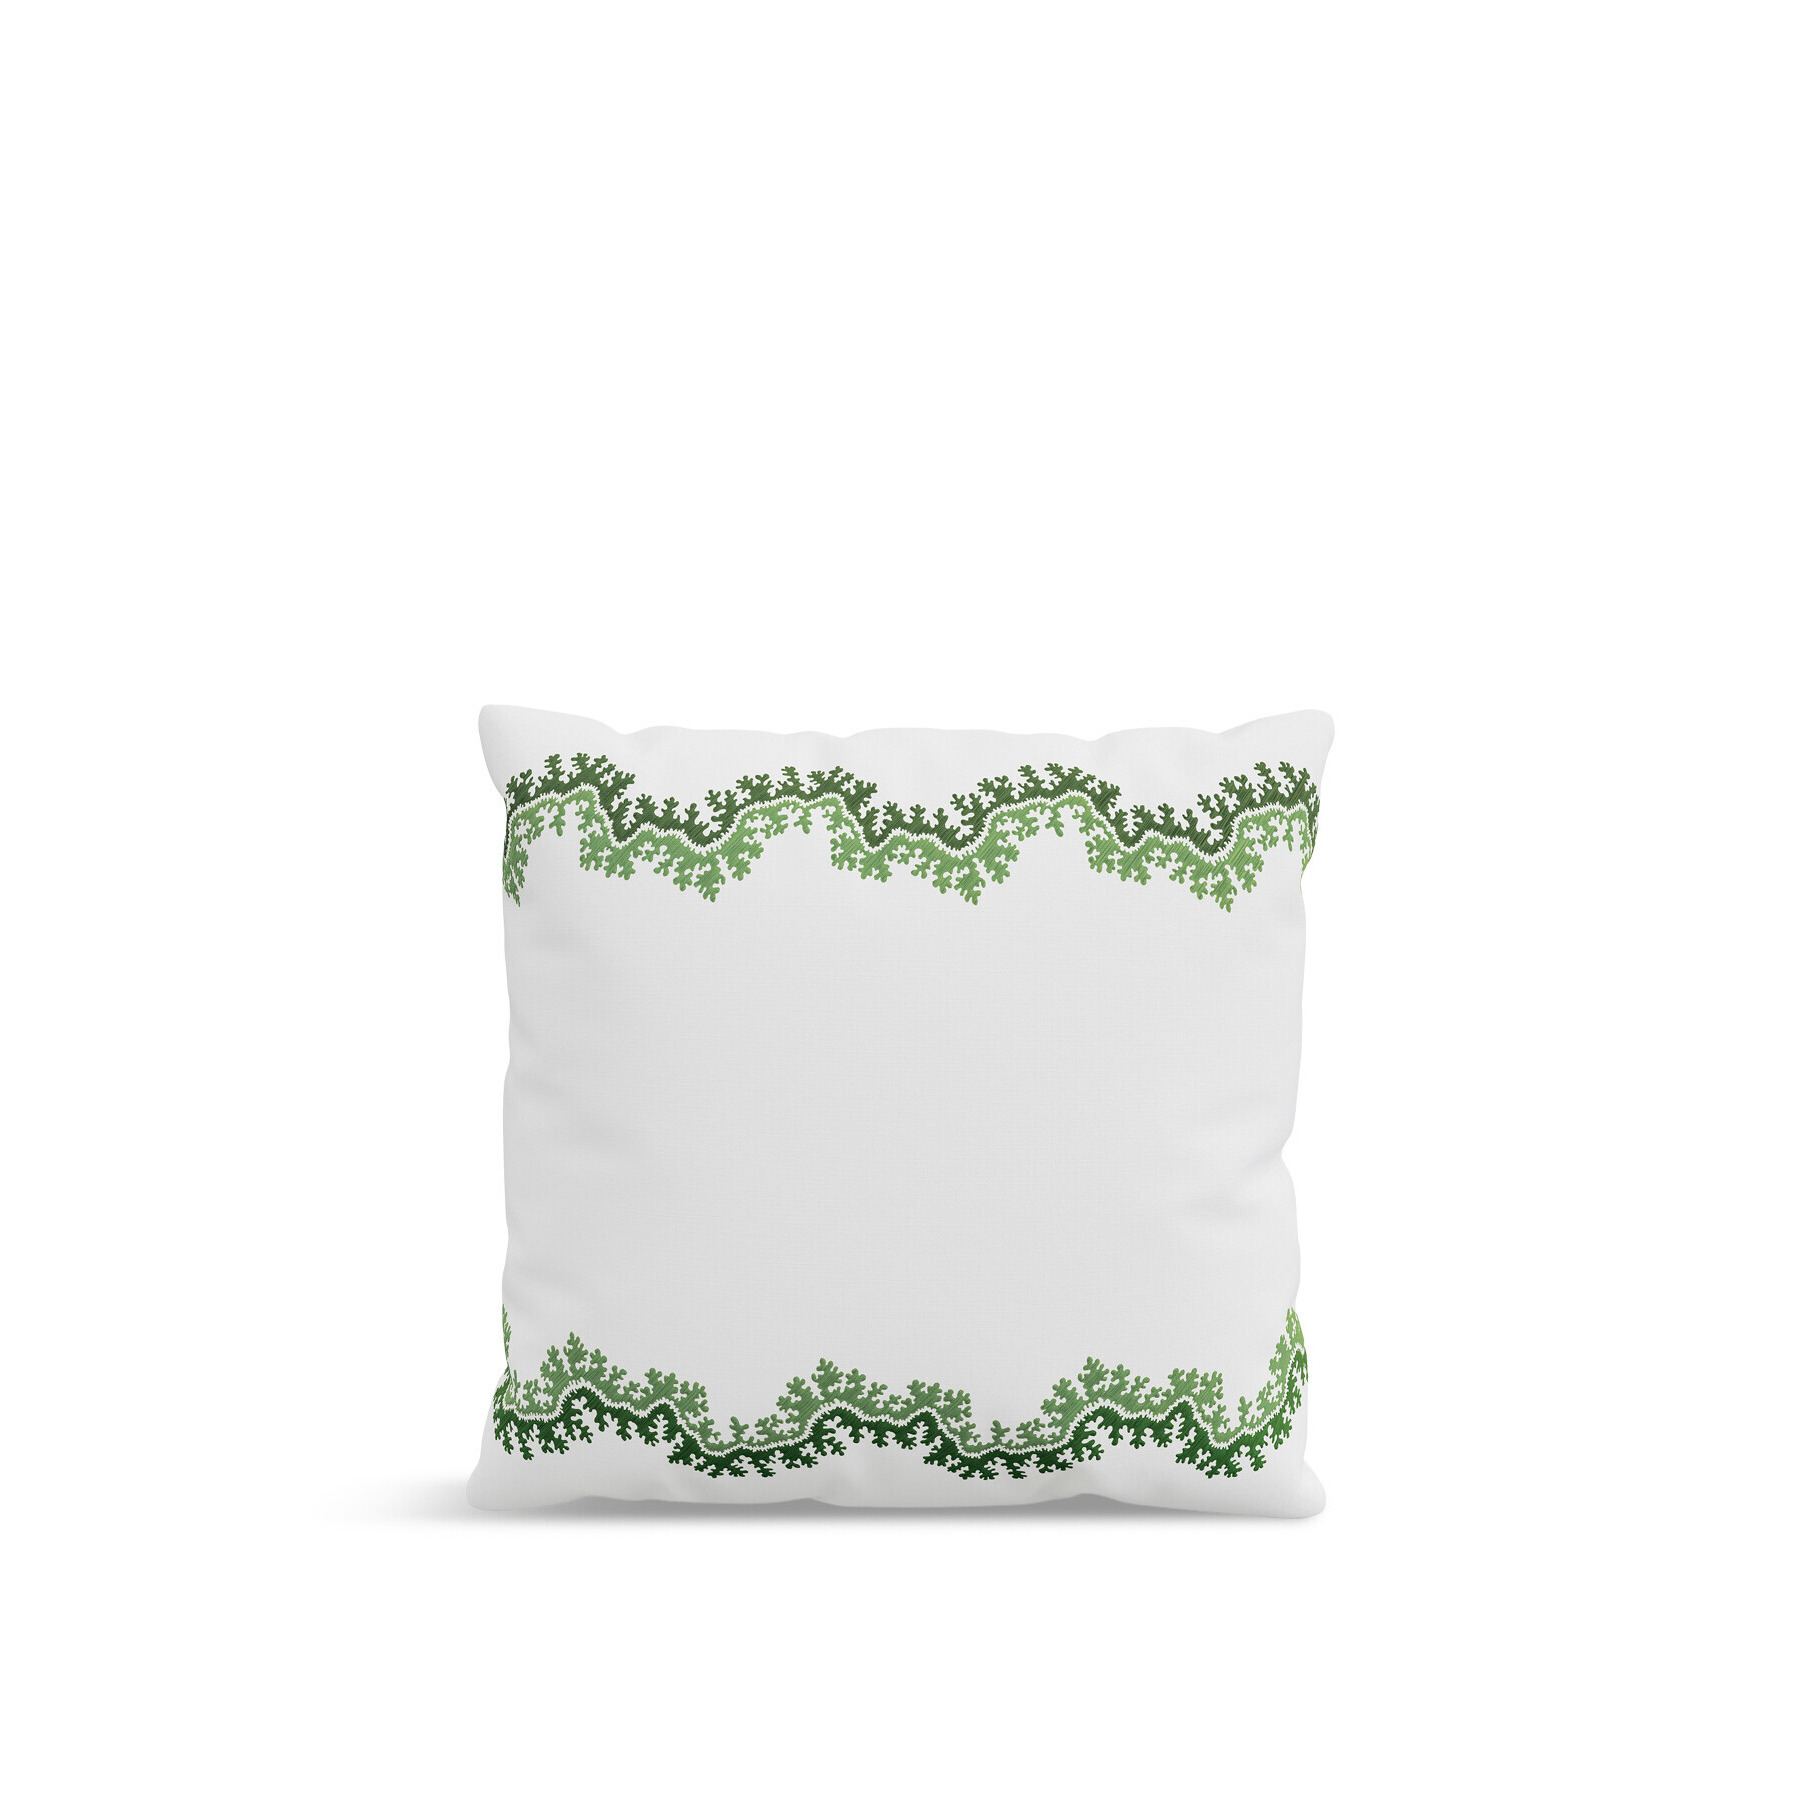 Sanderson Sycamore & Oak Pillow Case Pairs - Size Standard Green - image 1